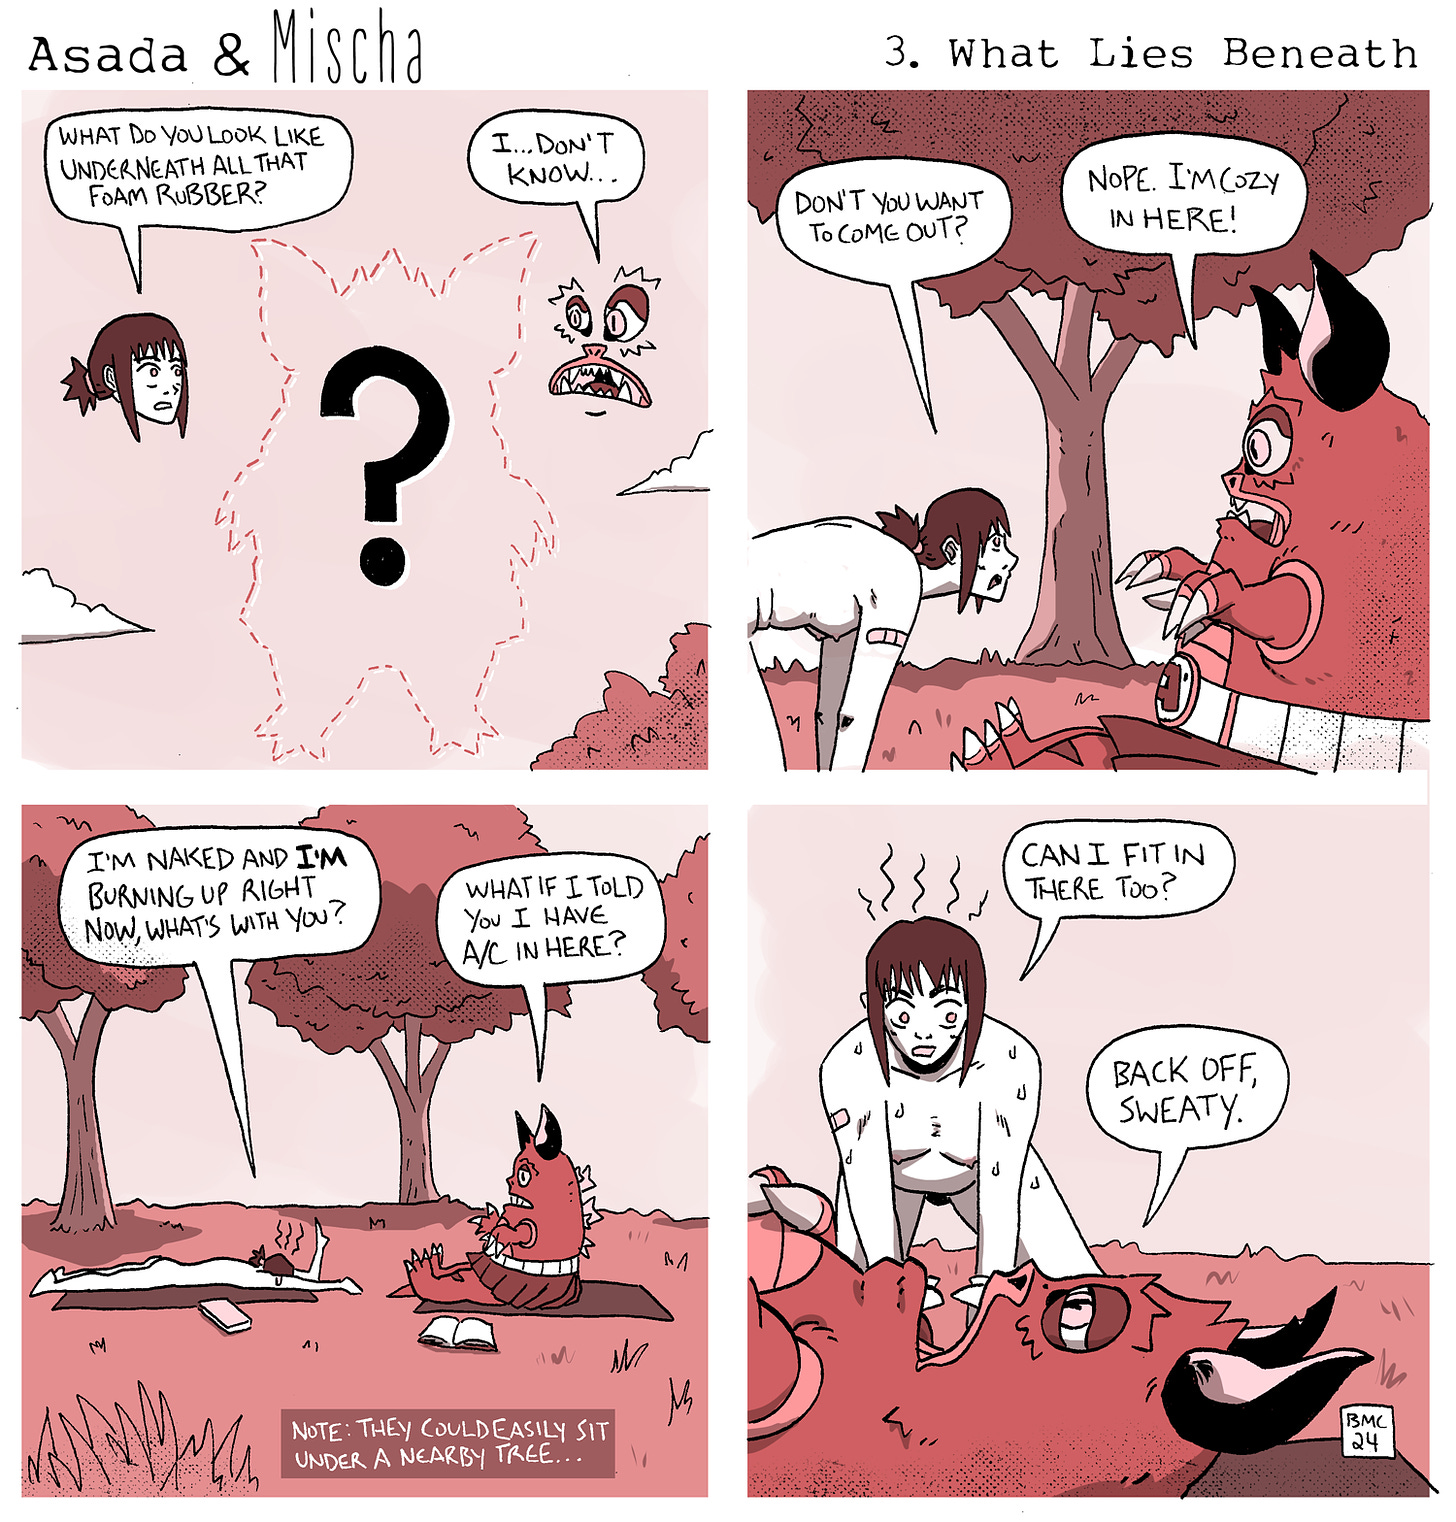 Asada & Mischa 3: What Lies Beneath. Panel 1: Mischa asks, "What do you look like underneath all that foam rubber?" Asada responds, "I...don't know..." Panel 2: Mischa, "Don't you want to come out?" Asada replies, "Nope. I'm cozy in here!" Panel 3: Mischa states, "I'm naked and I'm burning up alright? Now, what's with you?" Asada teases, "What if I told you I have A/C in here?" Panel 4: Mischa eagerly asks, "Can I fit in there too?" to which Asada curtly replies, "Back off, Sweaty." A footnote adds, "Note: They could easily sit under a nearby tree..."